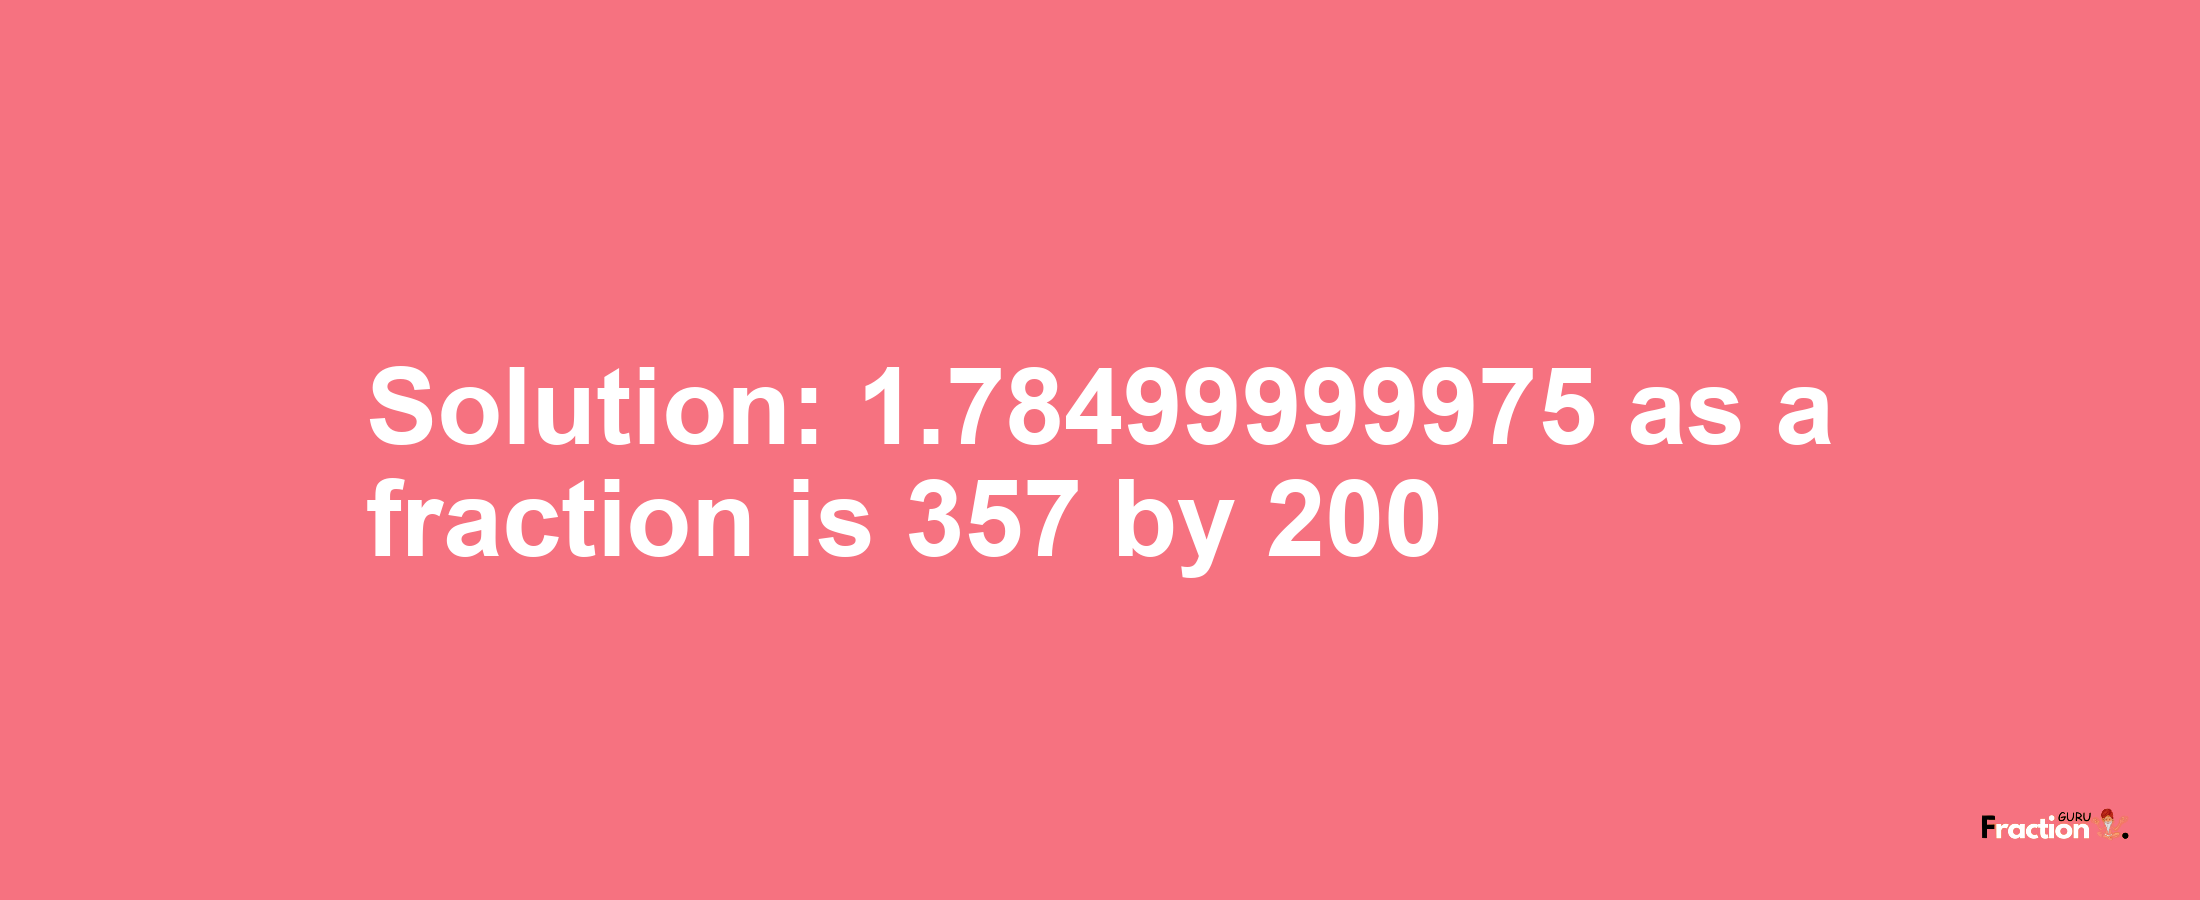 Solution:1.78499999975 as a fraction is 357/200